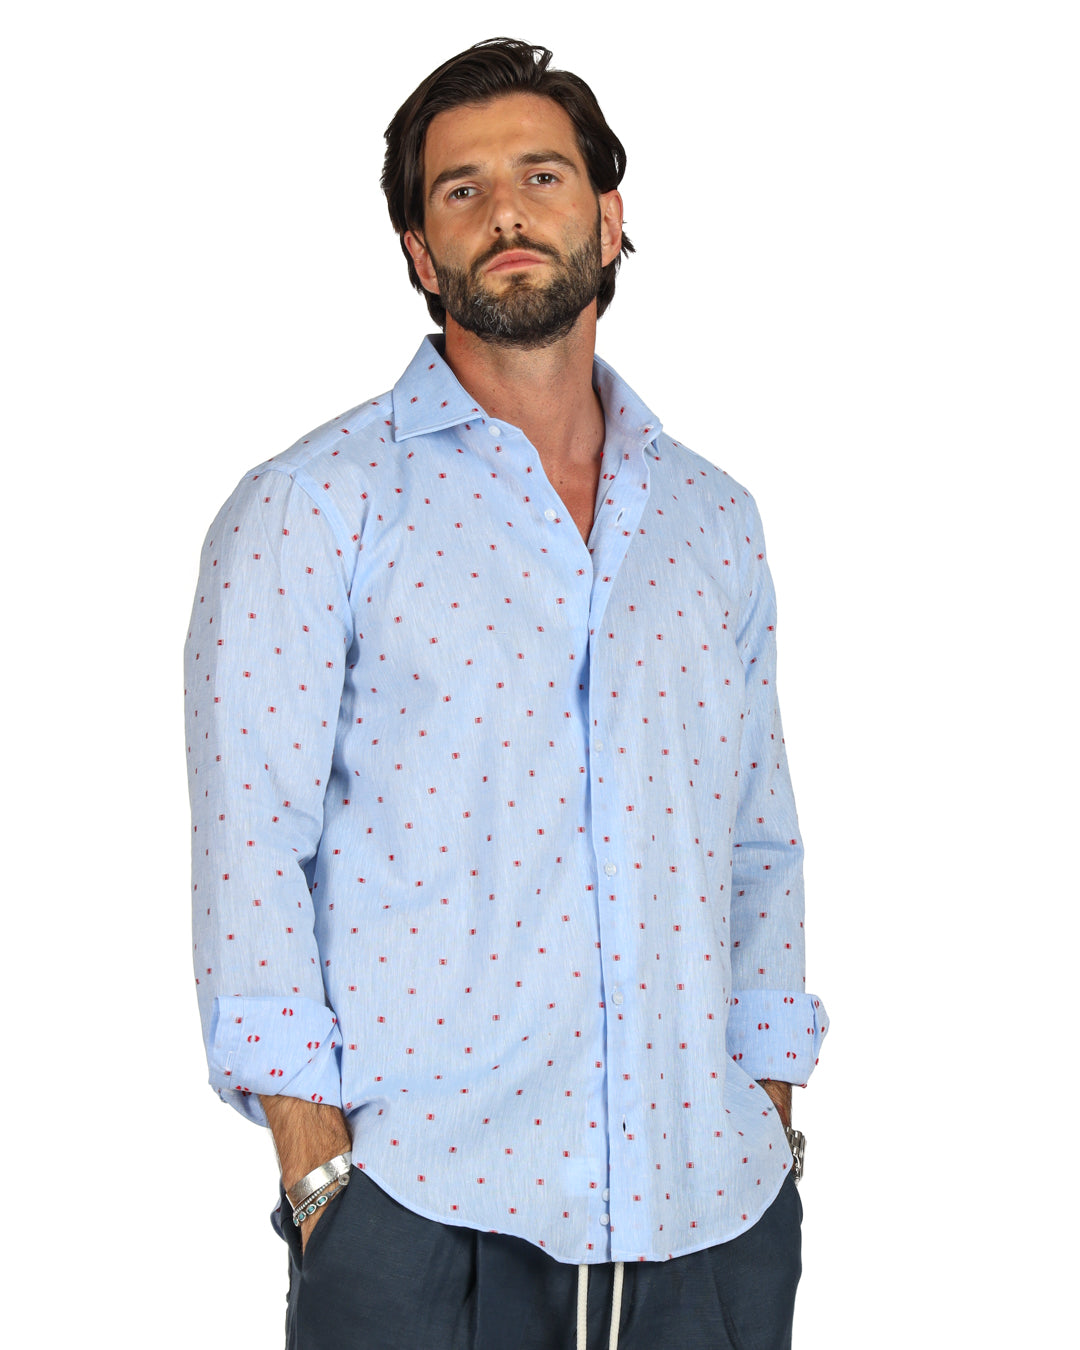 Salina - Classic light blue linen shirt with red embroidery